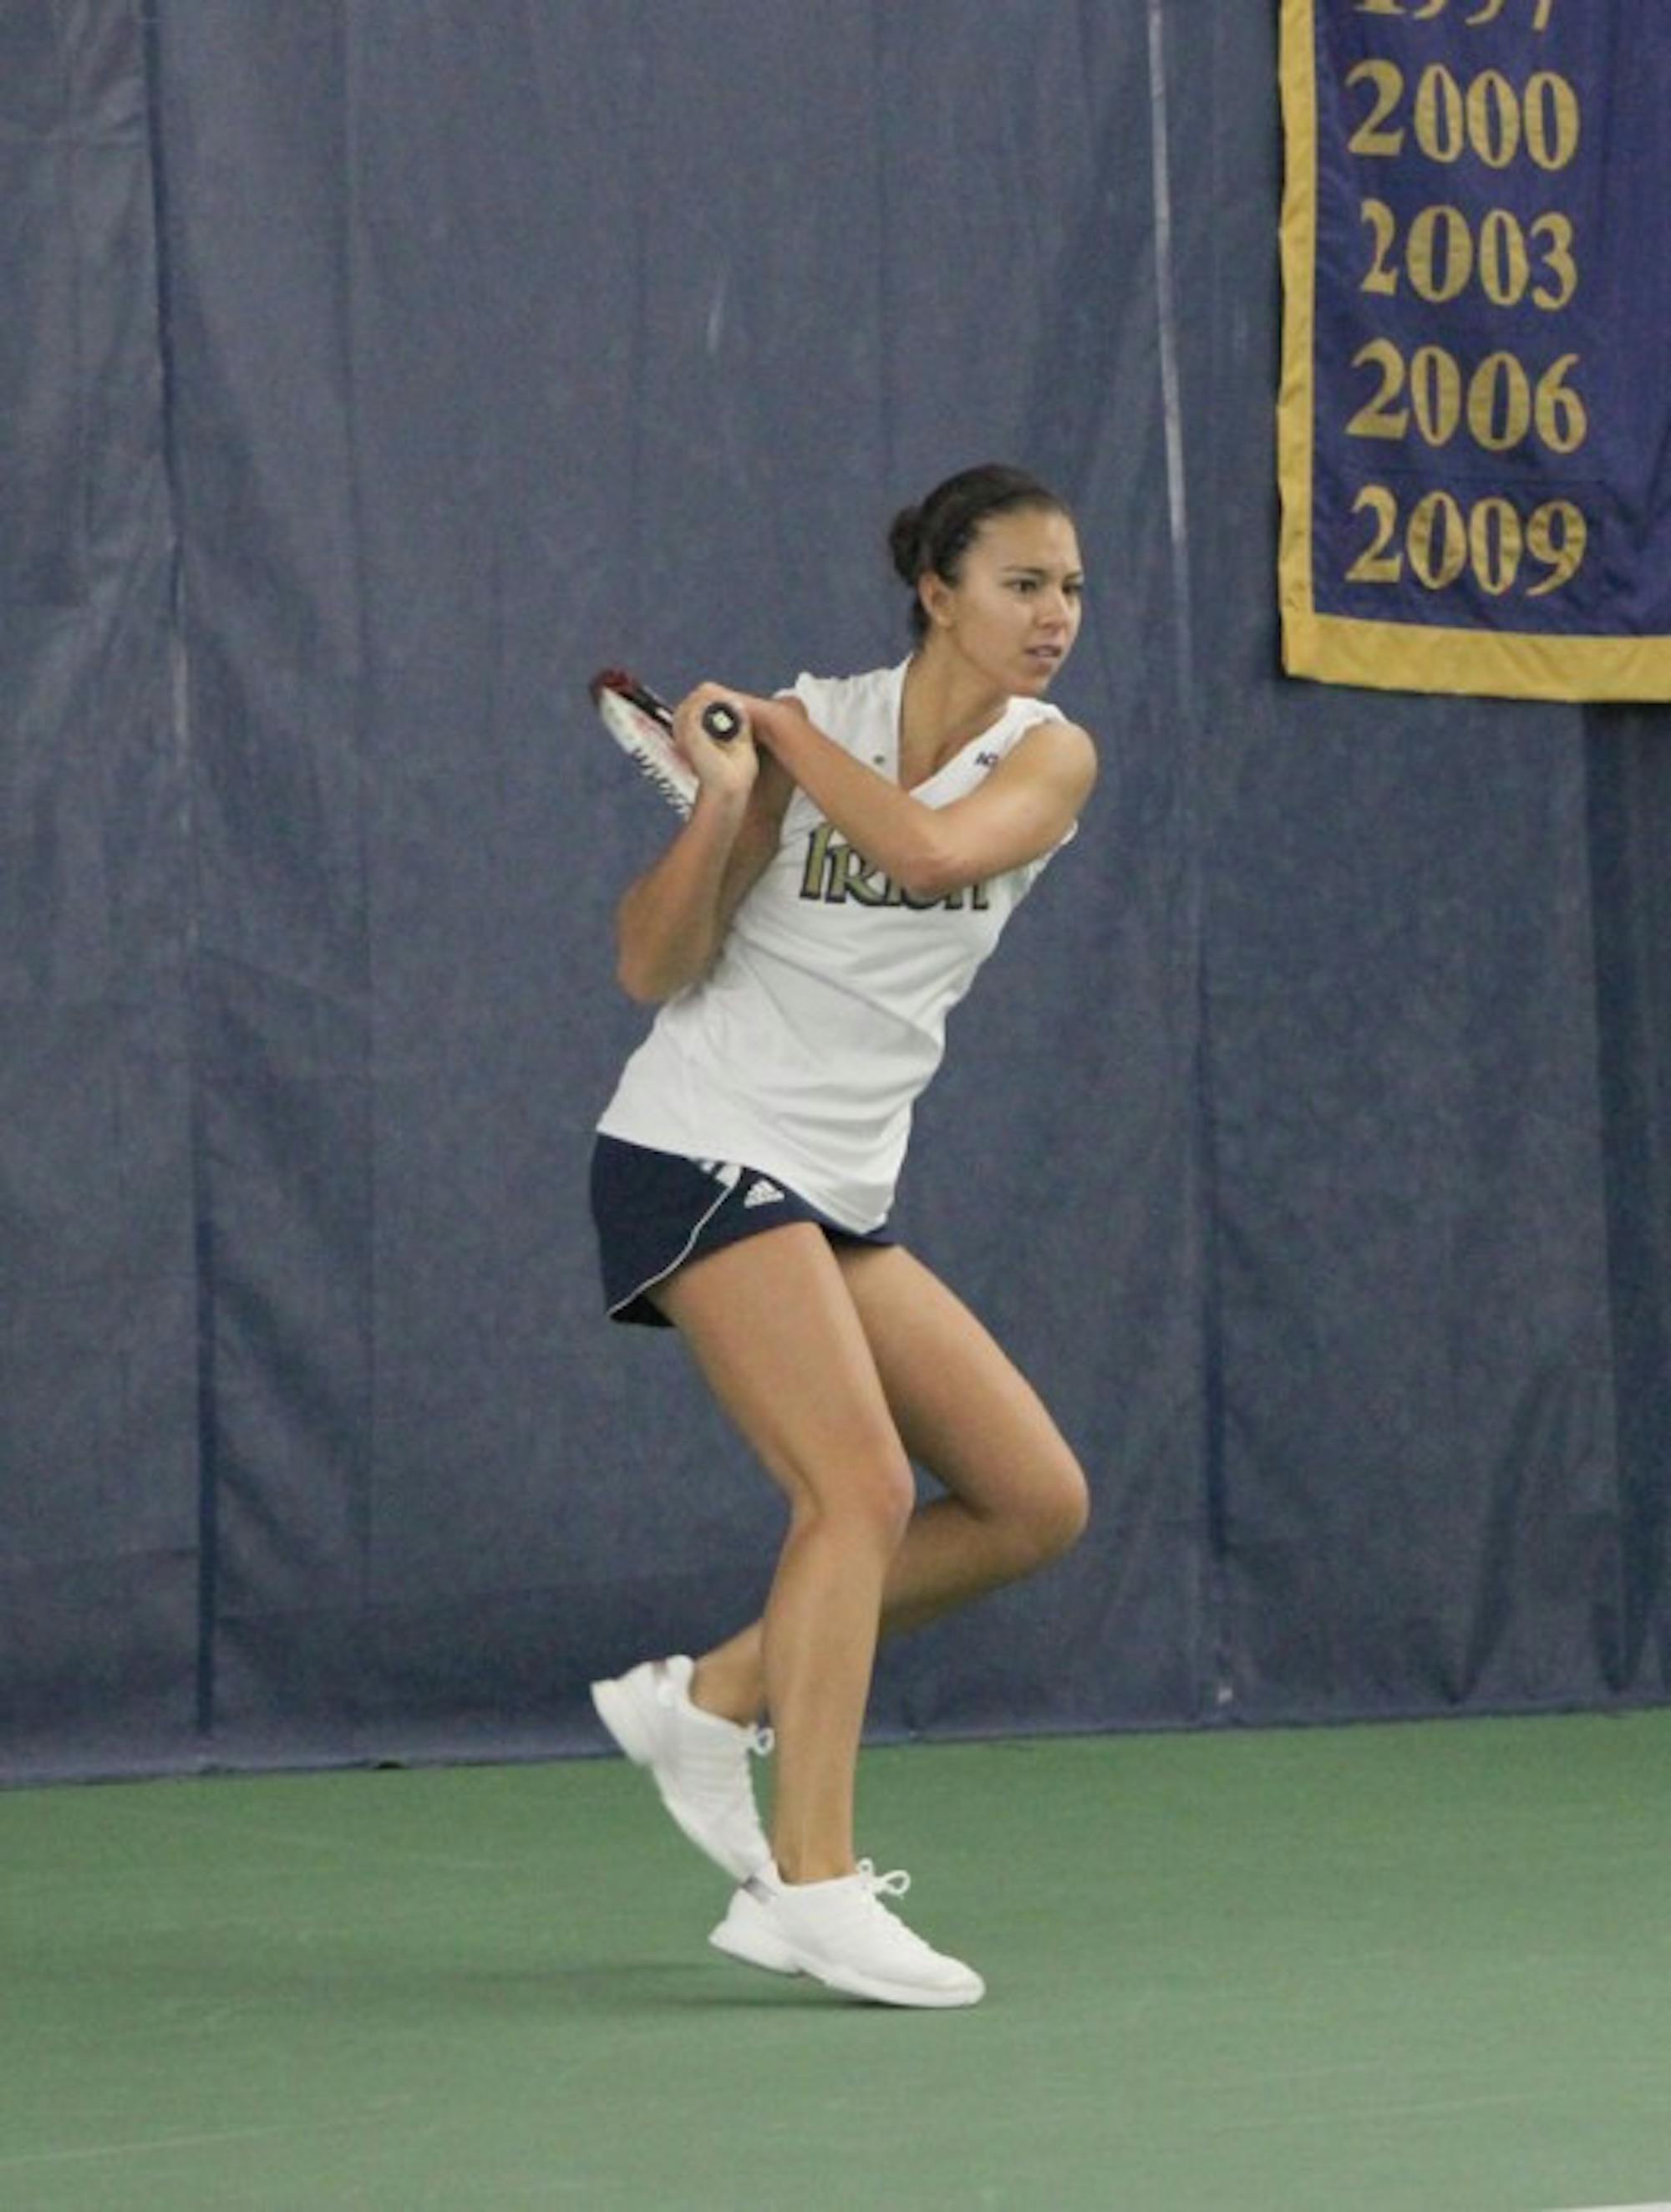 Irish senior Britney Sanders returns a volley during Notre Dame’s 4-3 victory over Indiana on Feb. 2 at Eck Tennis Pavilion.